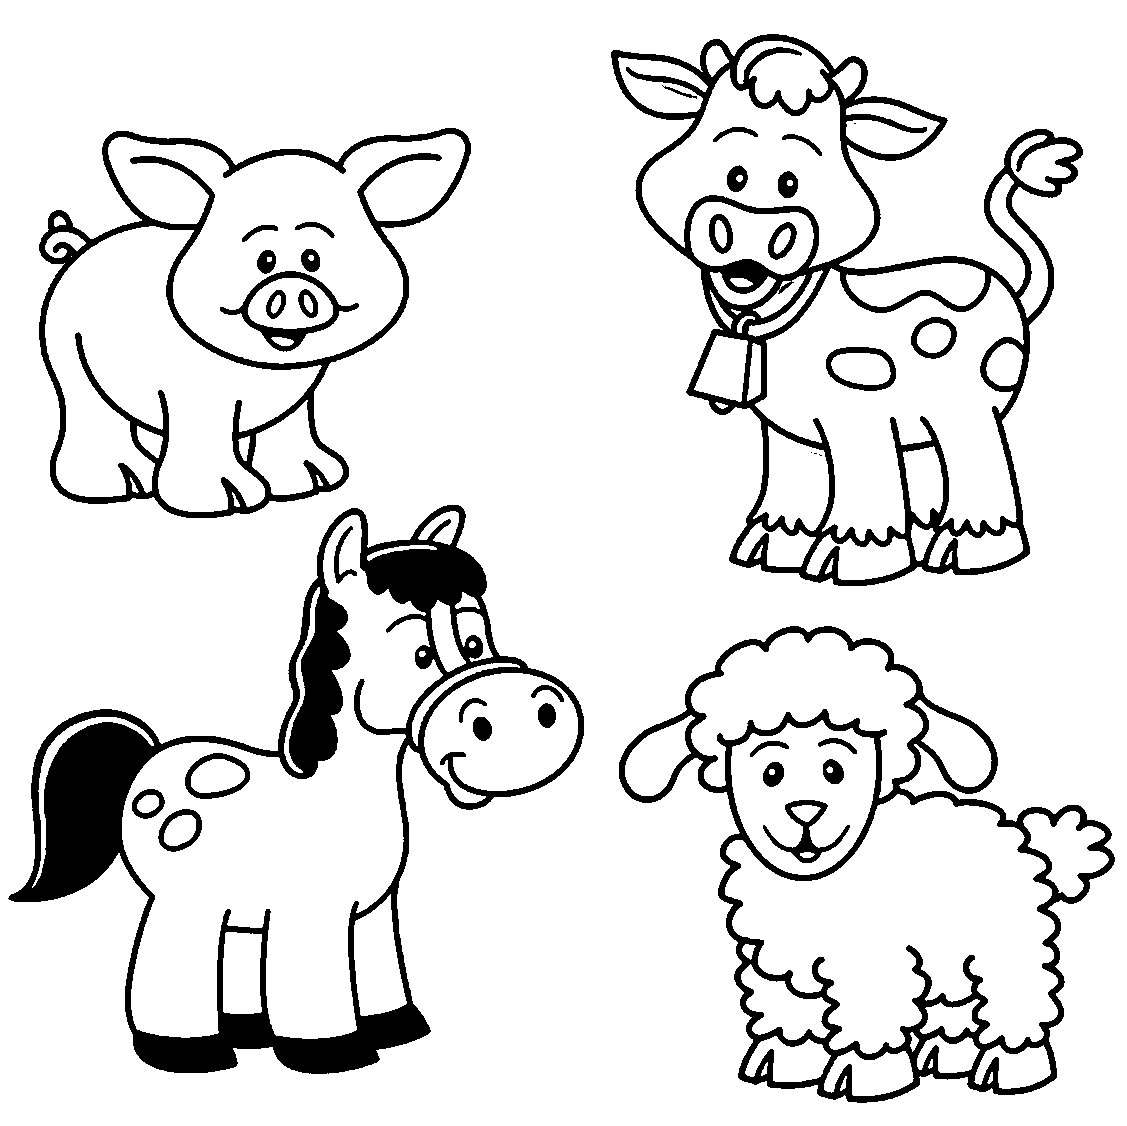 animal coloring pages for kids easy animal coloring pages for kids coloring home animal for pages kids coloring 